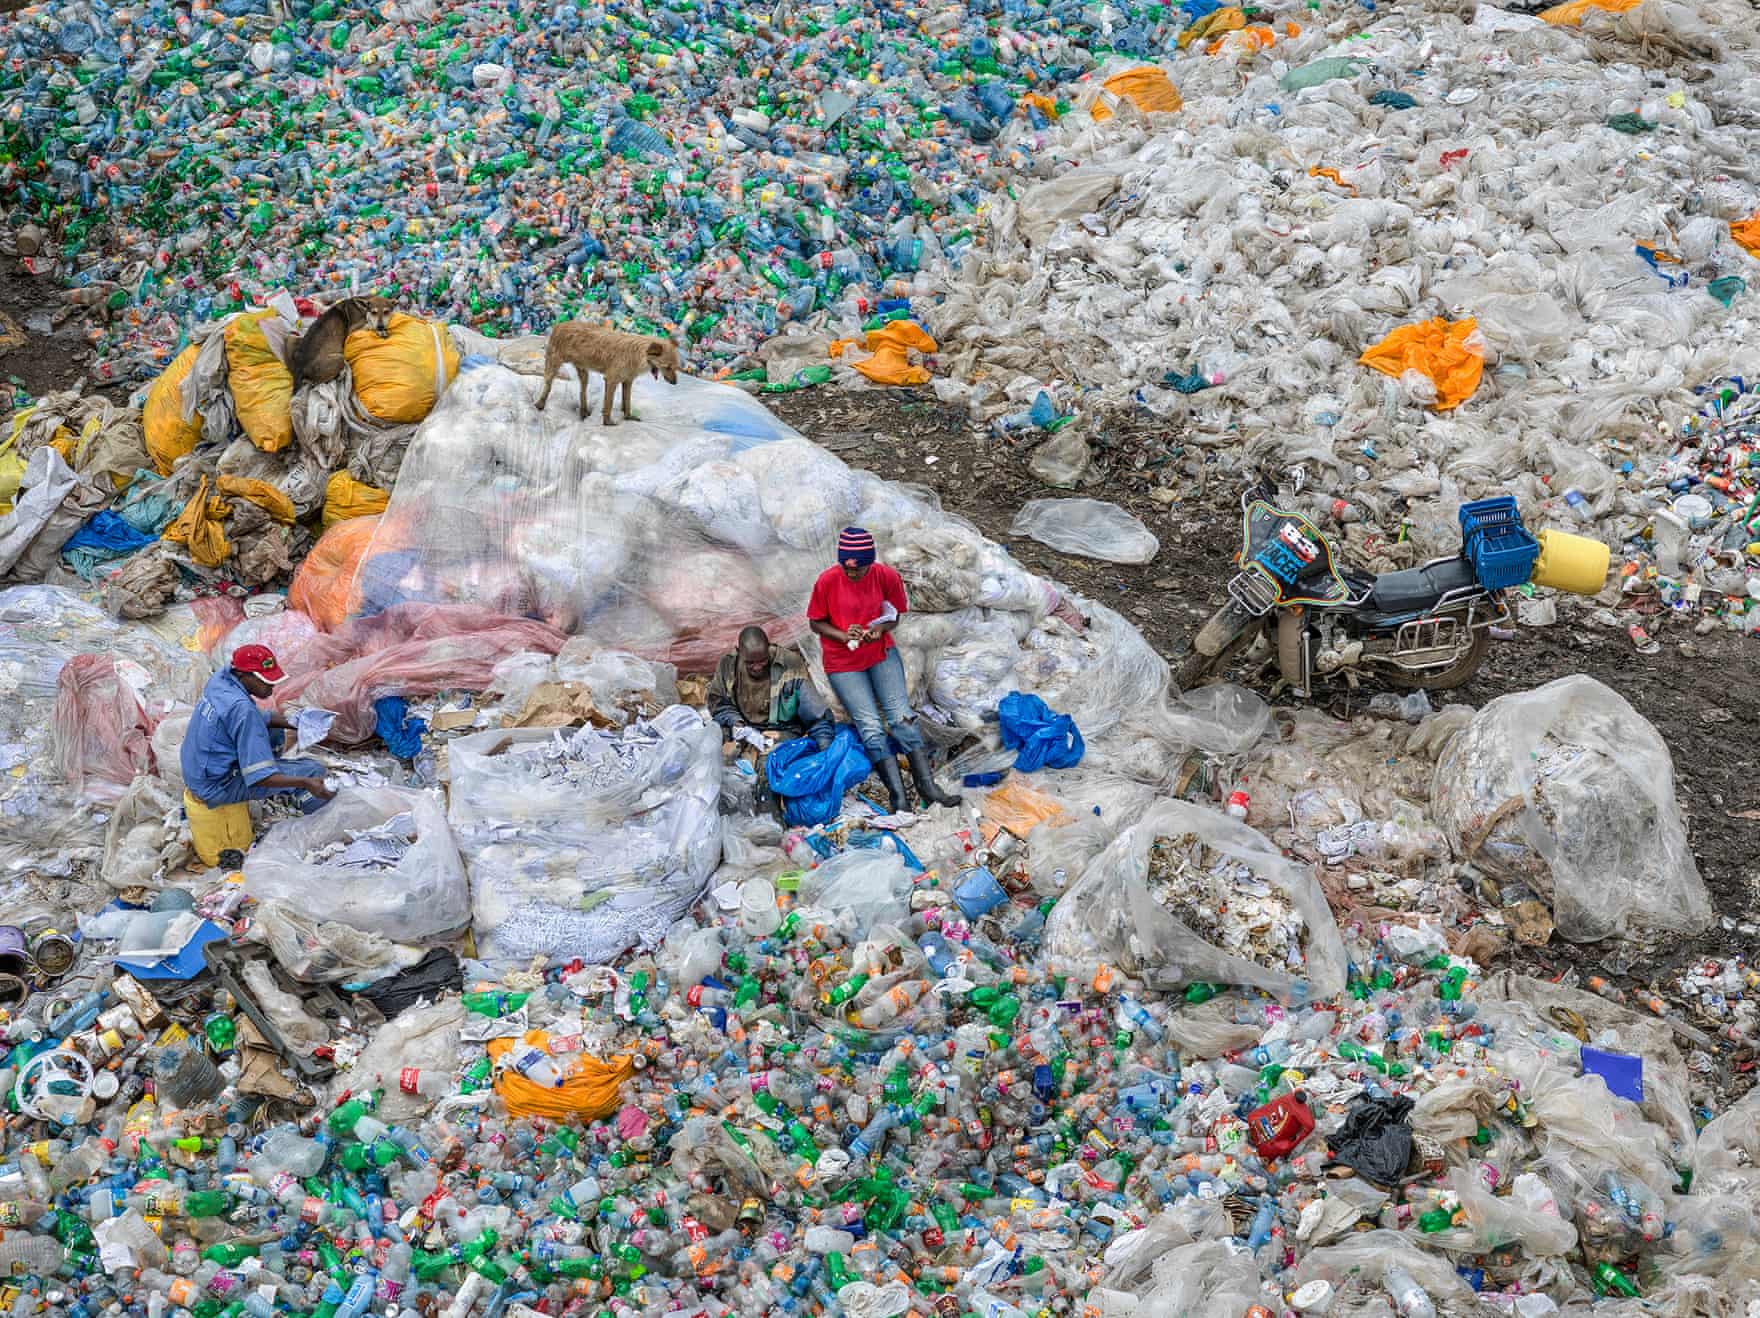 The plague of plastic, but new global treaty brings hope